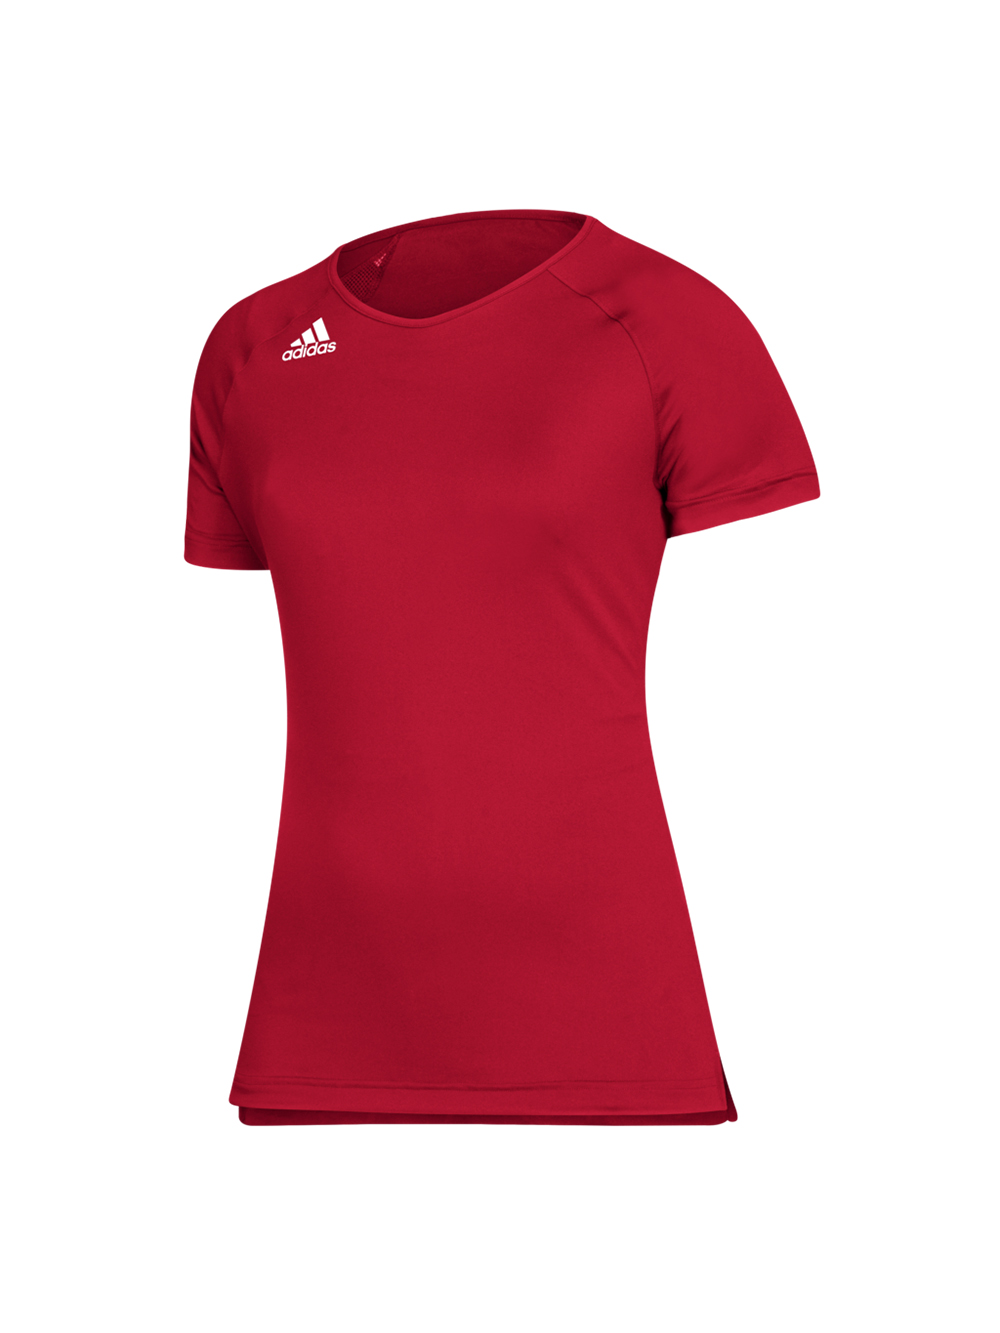 Adidas Hi-Lo Cap Jersey | Midwest Volleyball Warehouse